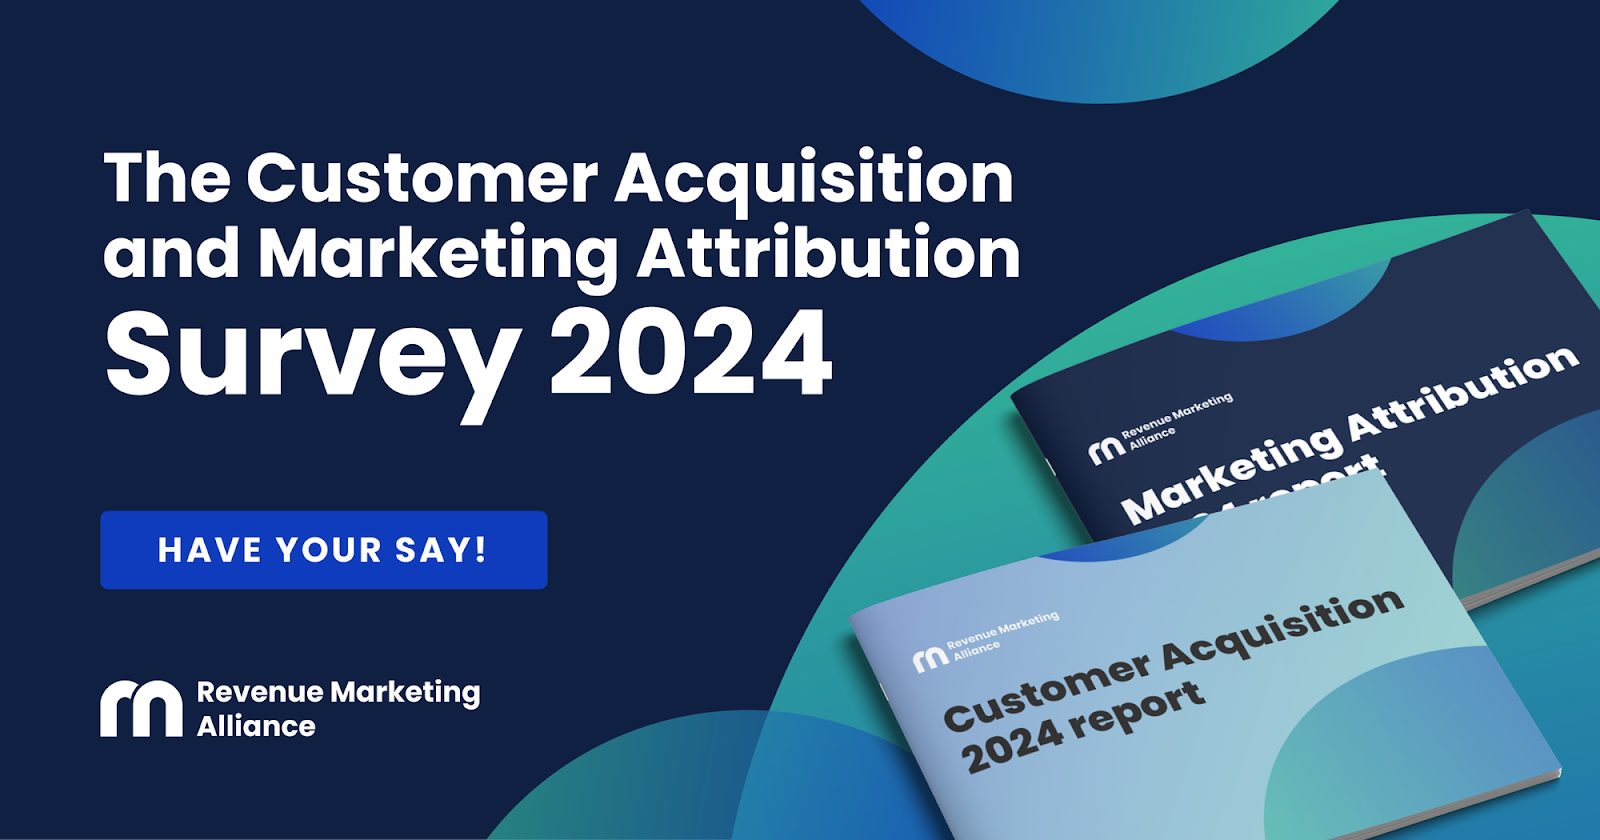 Customer acquisition and marketing attribution survey 2024